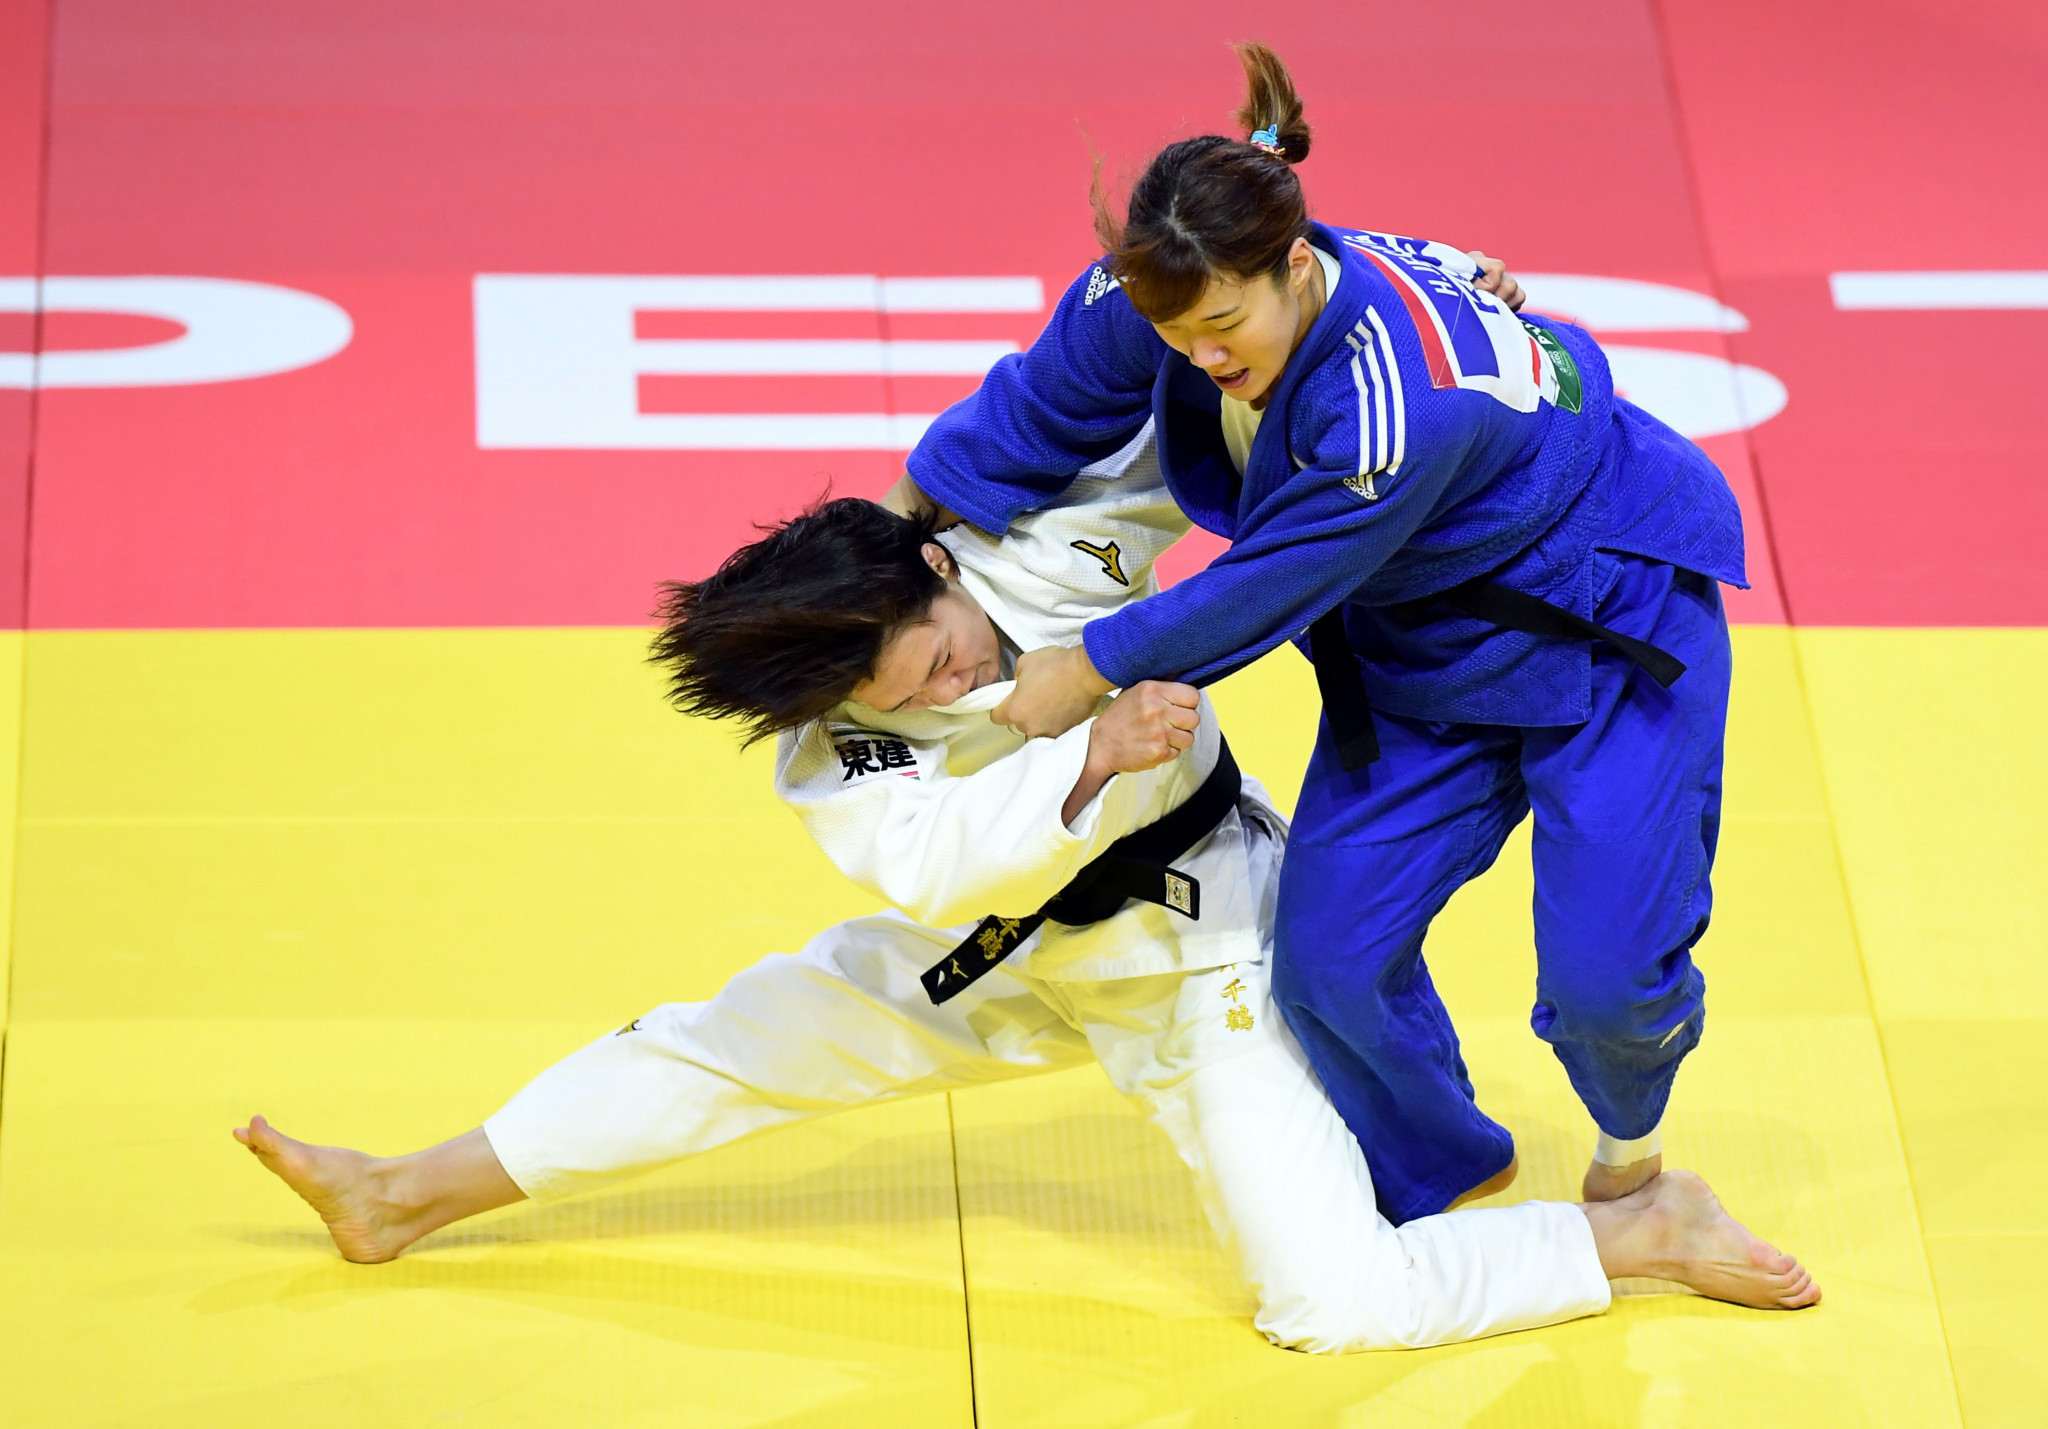 Chizuru Arai claimed her second gold medal of the week as she was part of the victorious Japanese team ©Getty Images